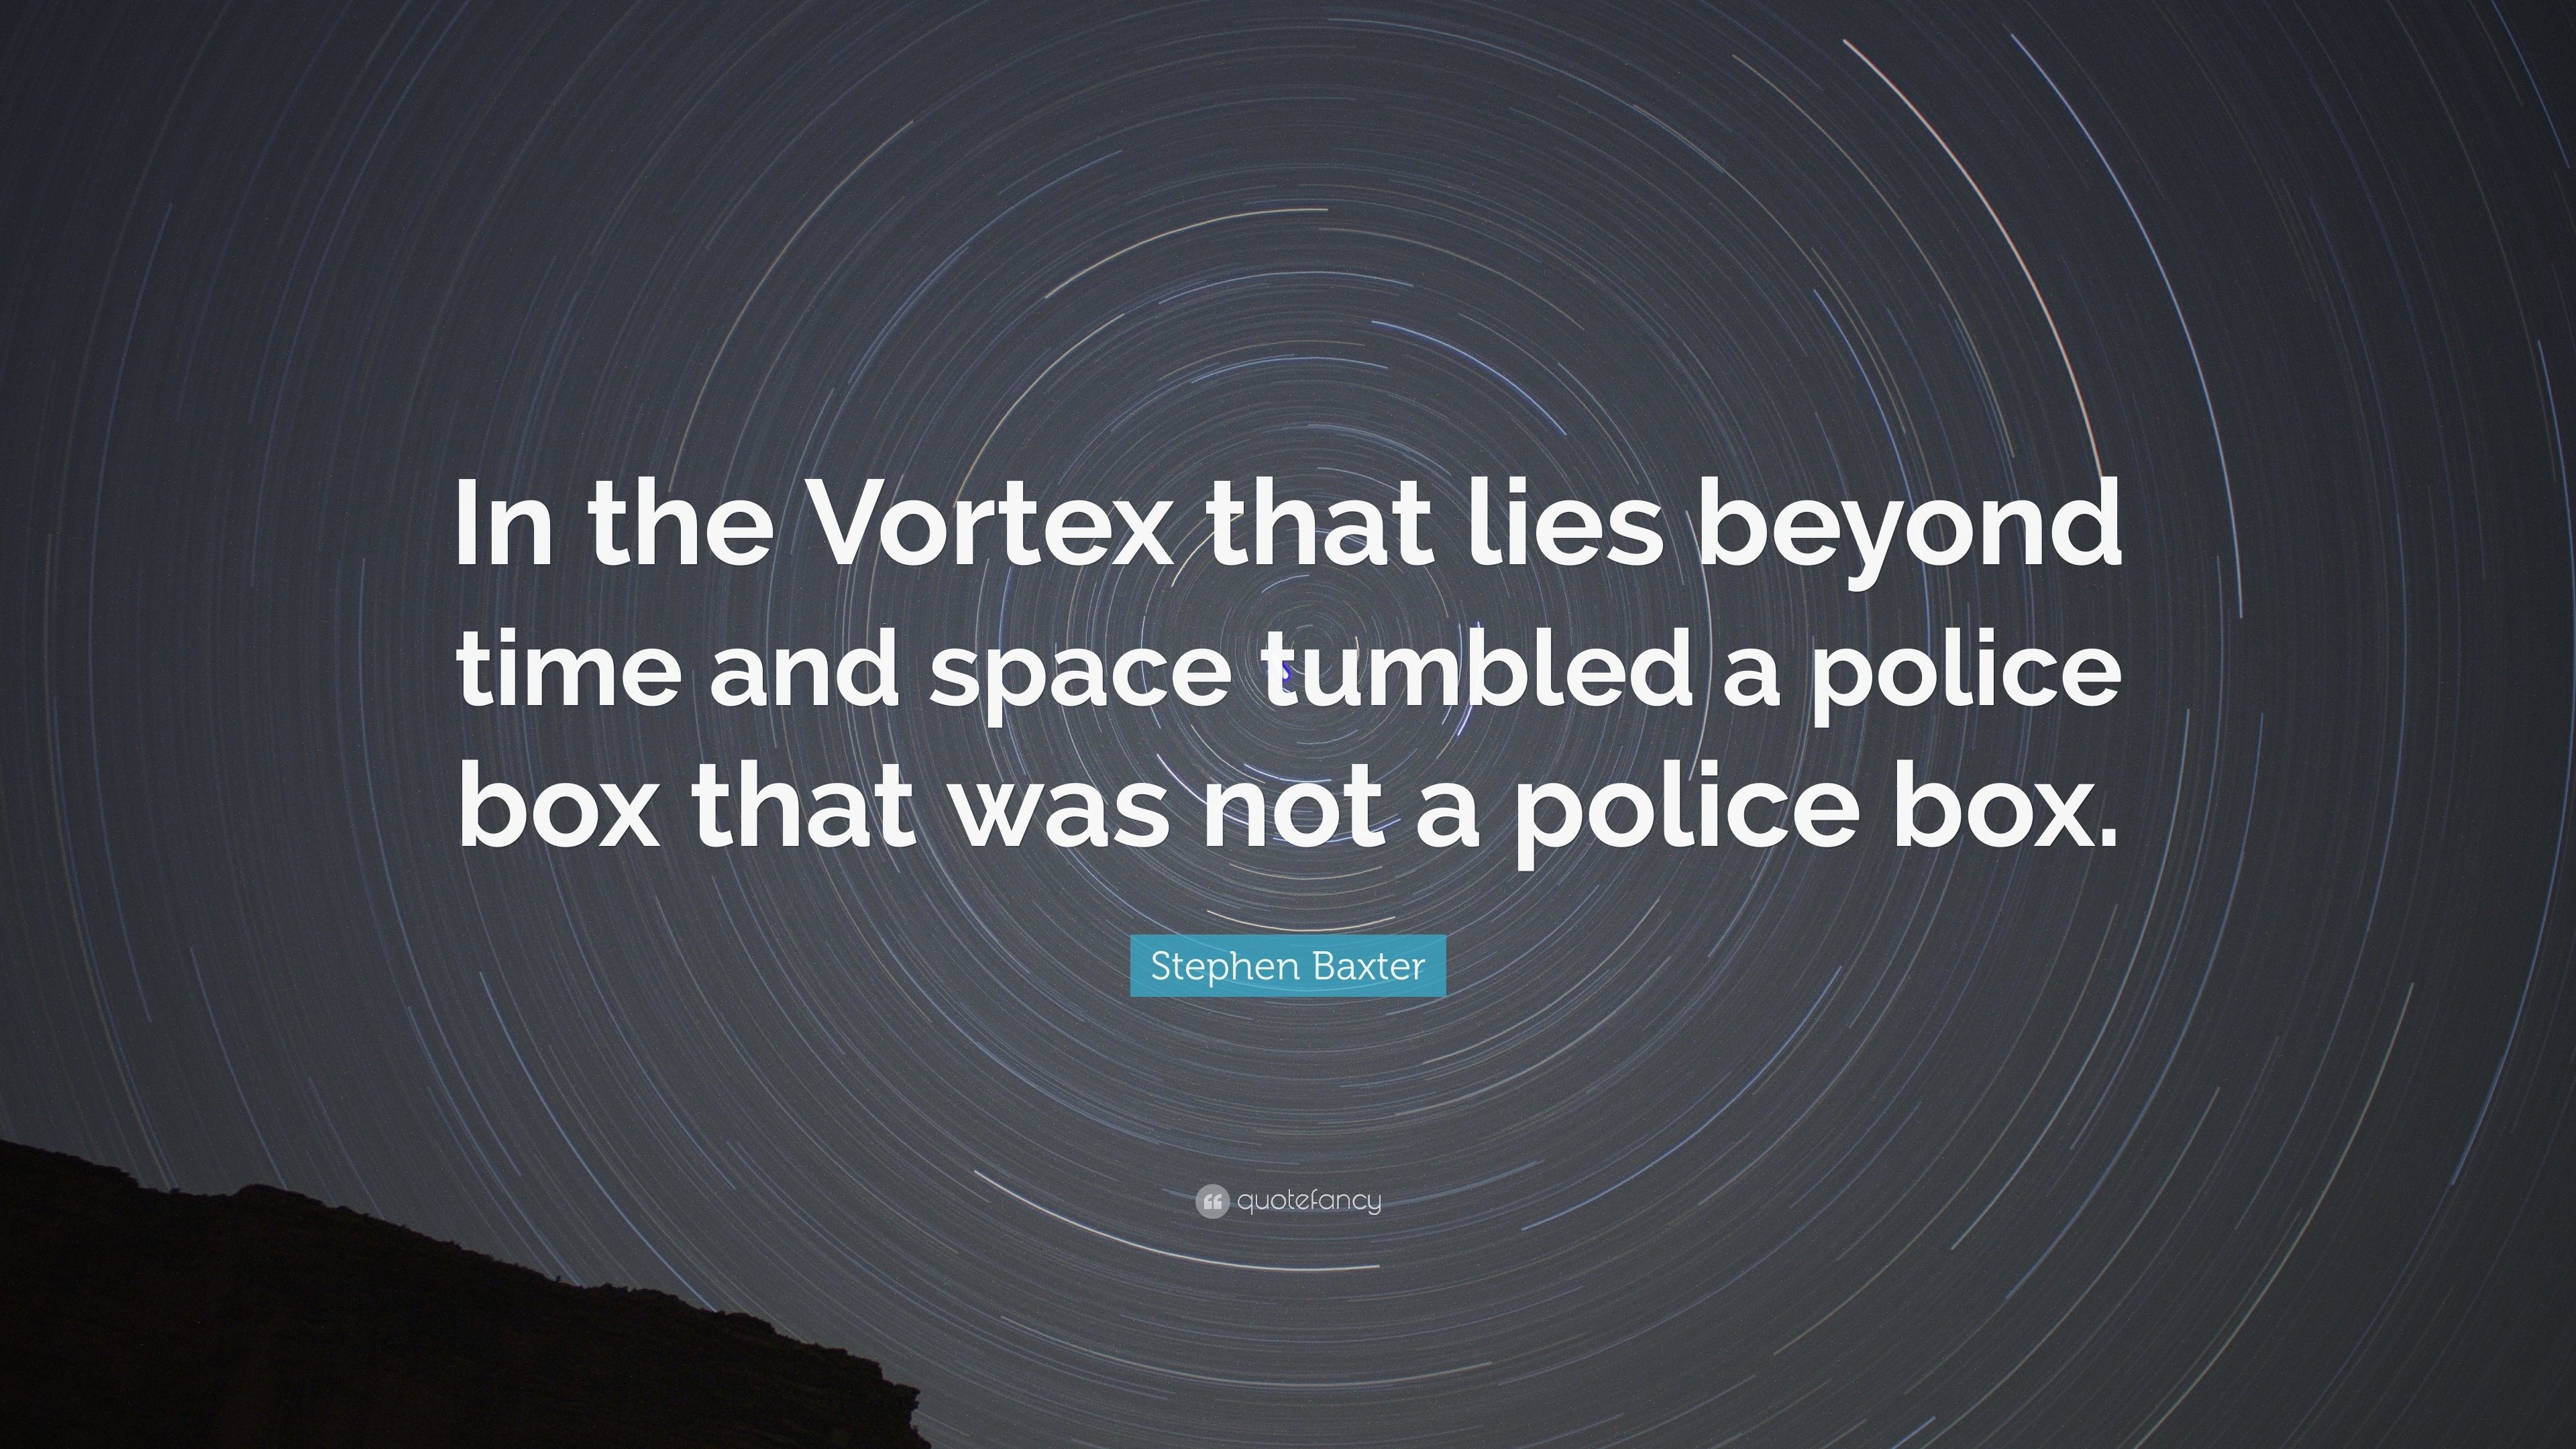 3840x2160 Stephen Baxter Quote: “In the Vortex that lies beyond time and space  tumbled a